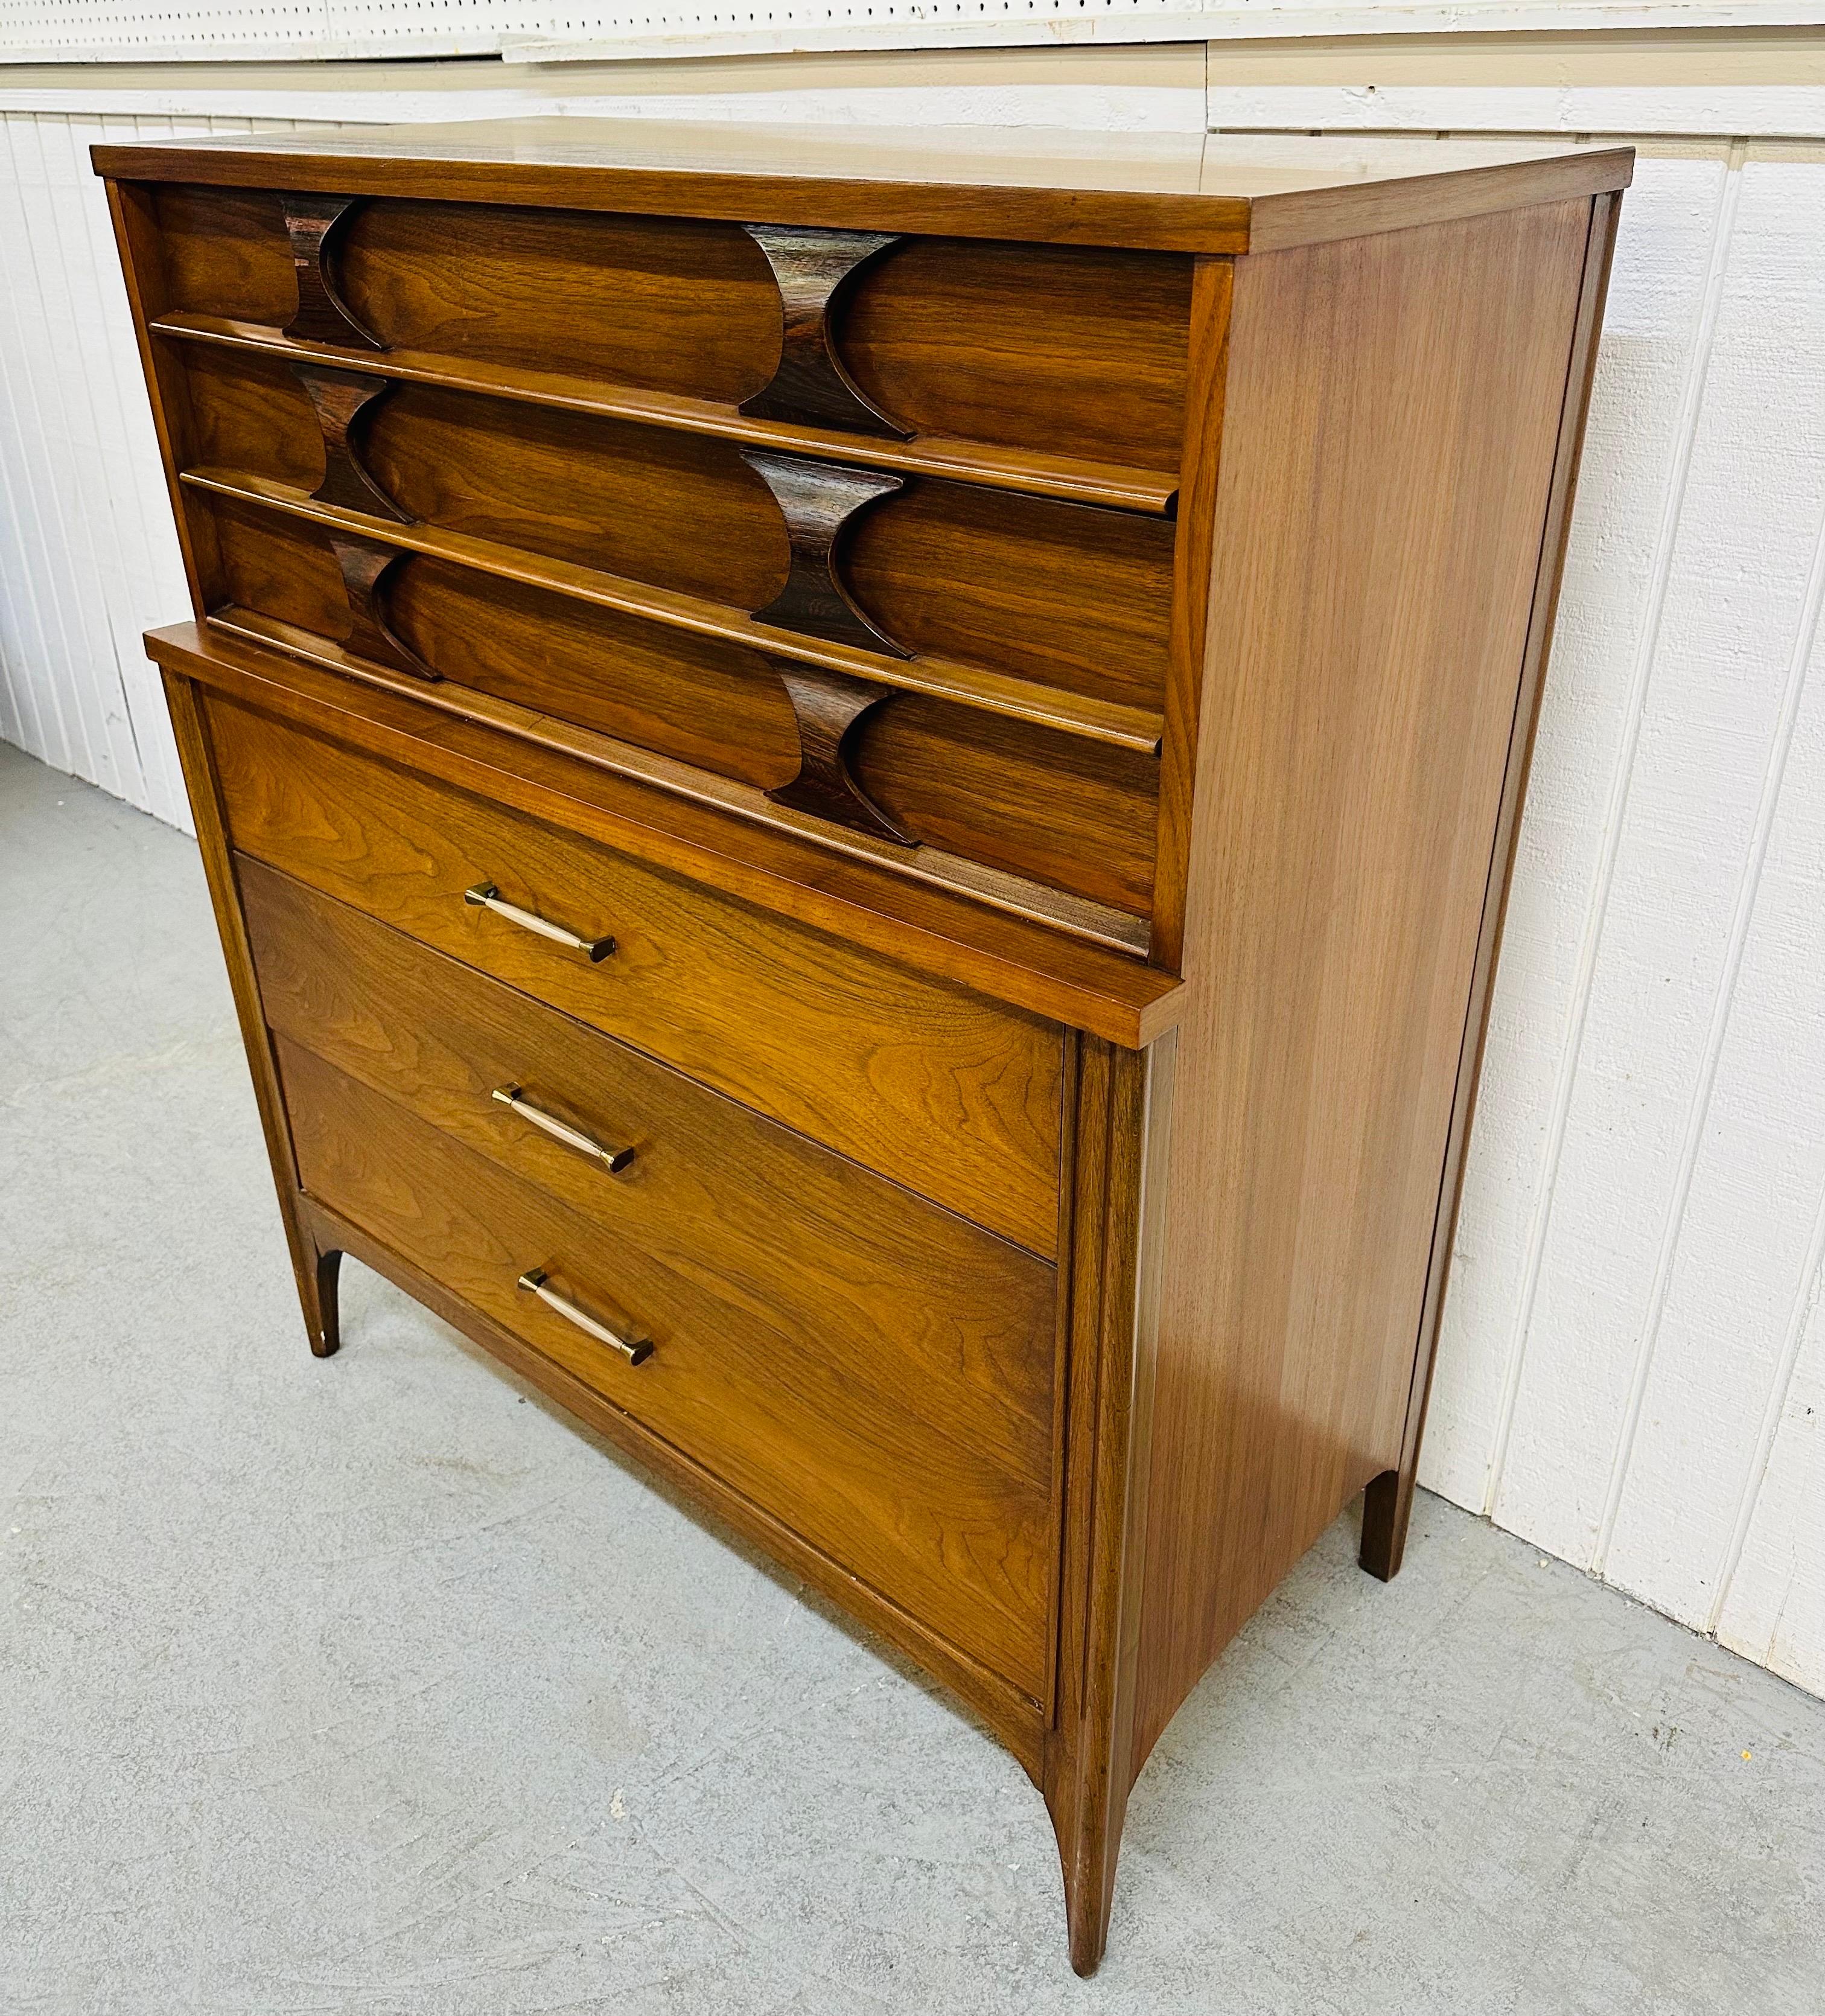 This listing is for a Mid-Century Modern Kent Coffey Perspecta Walnut High Chest. Featuring two top drawers with sculpted rosewood pulls, three larger drawers at the bottom with original hardware, and a beautiful walnut finish. This is an iconic